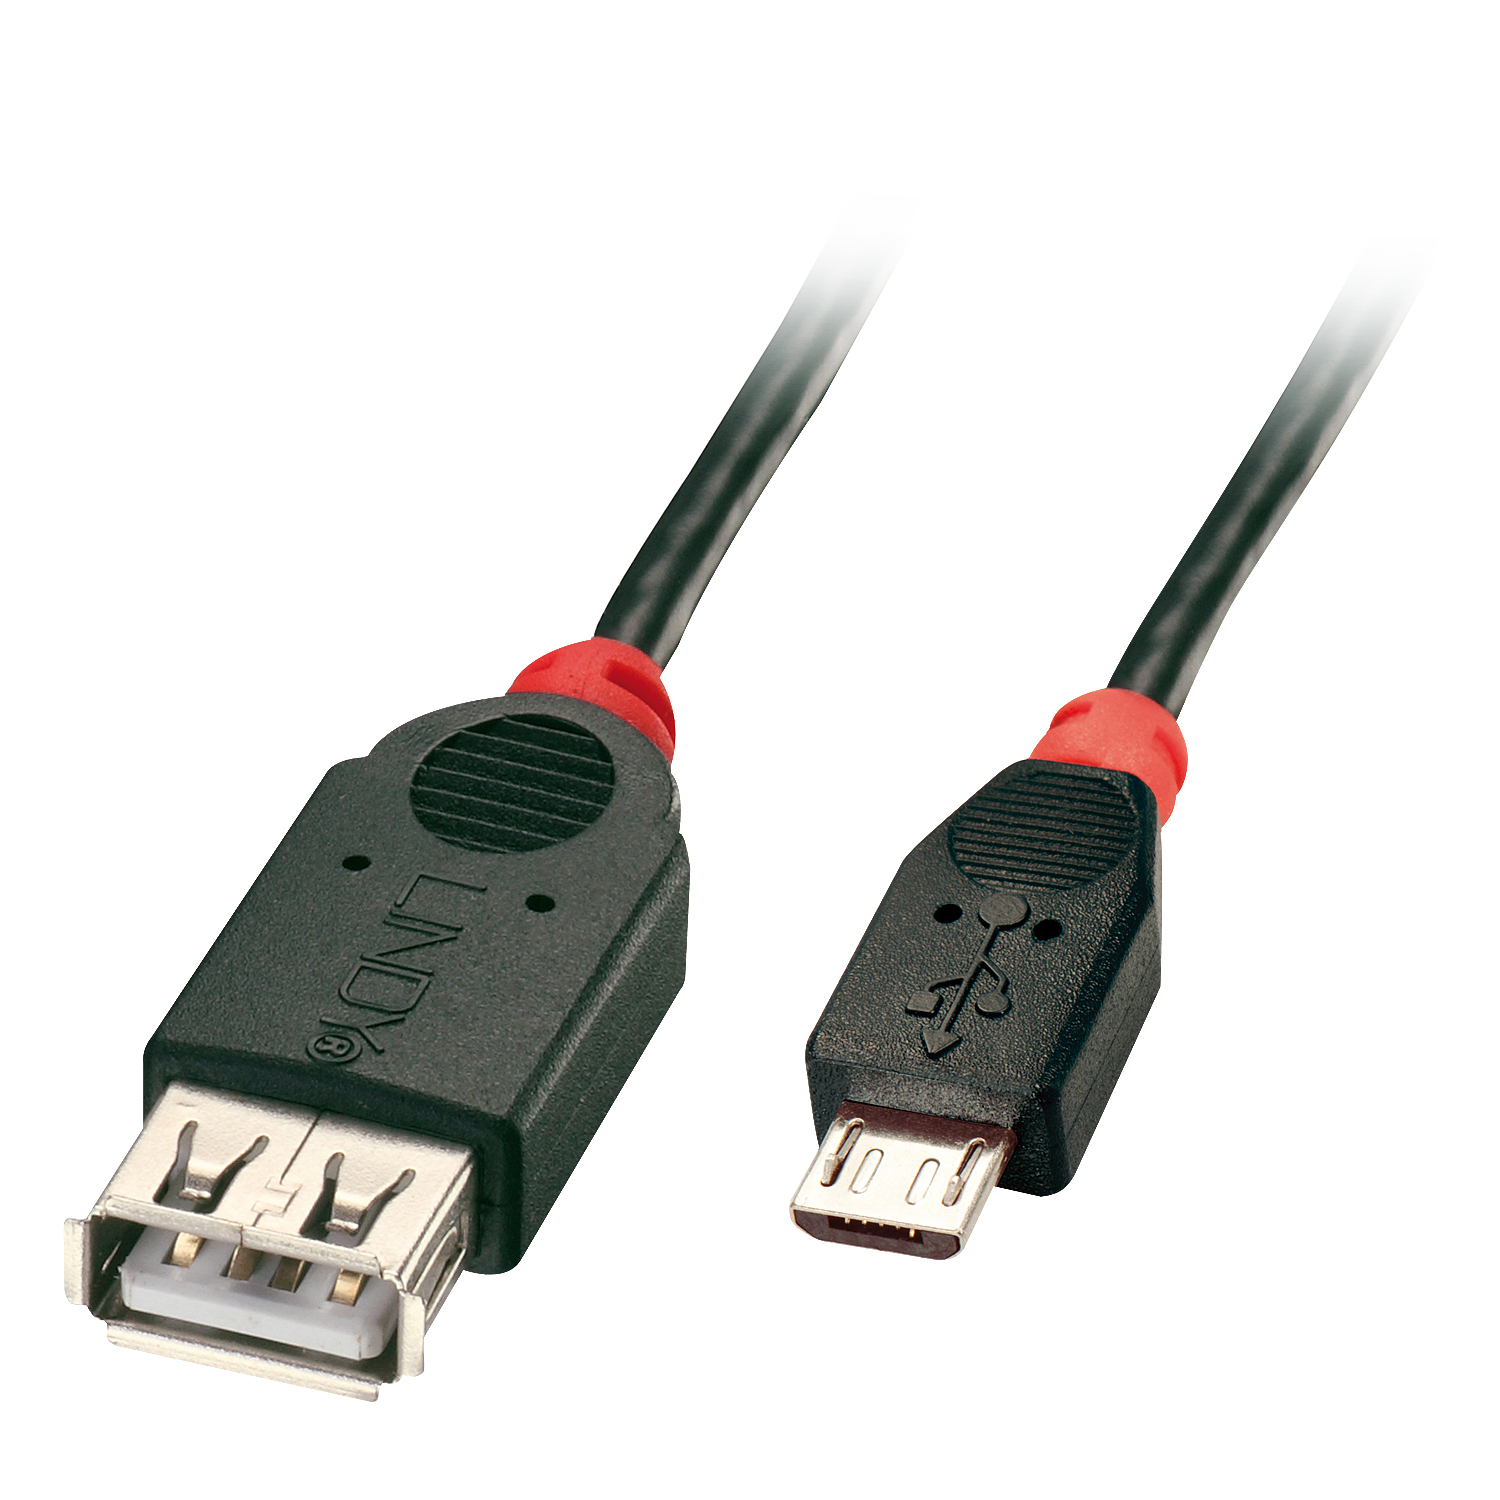 Photos - Cable (video, audio, USB) Lindy 0.5m USB 2.0 Type Micro-B to A OTG Cable 31935 